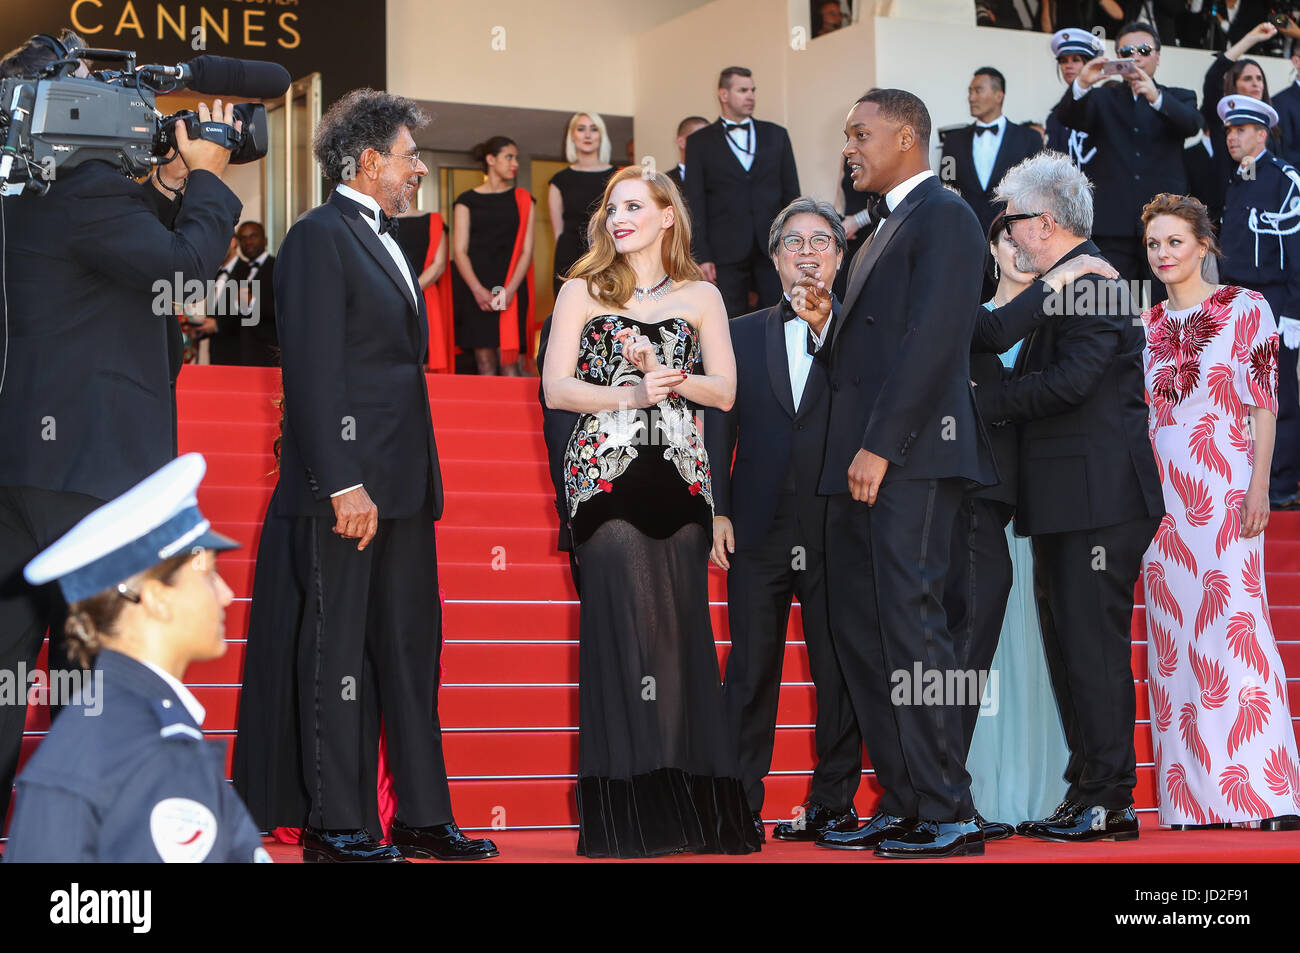 70th Cannes Film Festival - Gala Opening - 'Ismael's Ghosts' red carpet  Featuring: Gabriel Yared, Jessica Chastain, Will Smith, Pedro Almodovar, Maren Ade Where: Cannes, France When: 17 May 2017 Credit: WENN.com Stock Photo